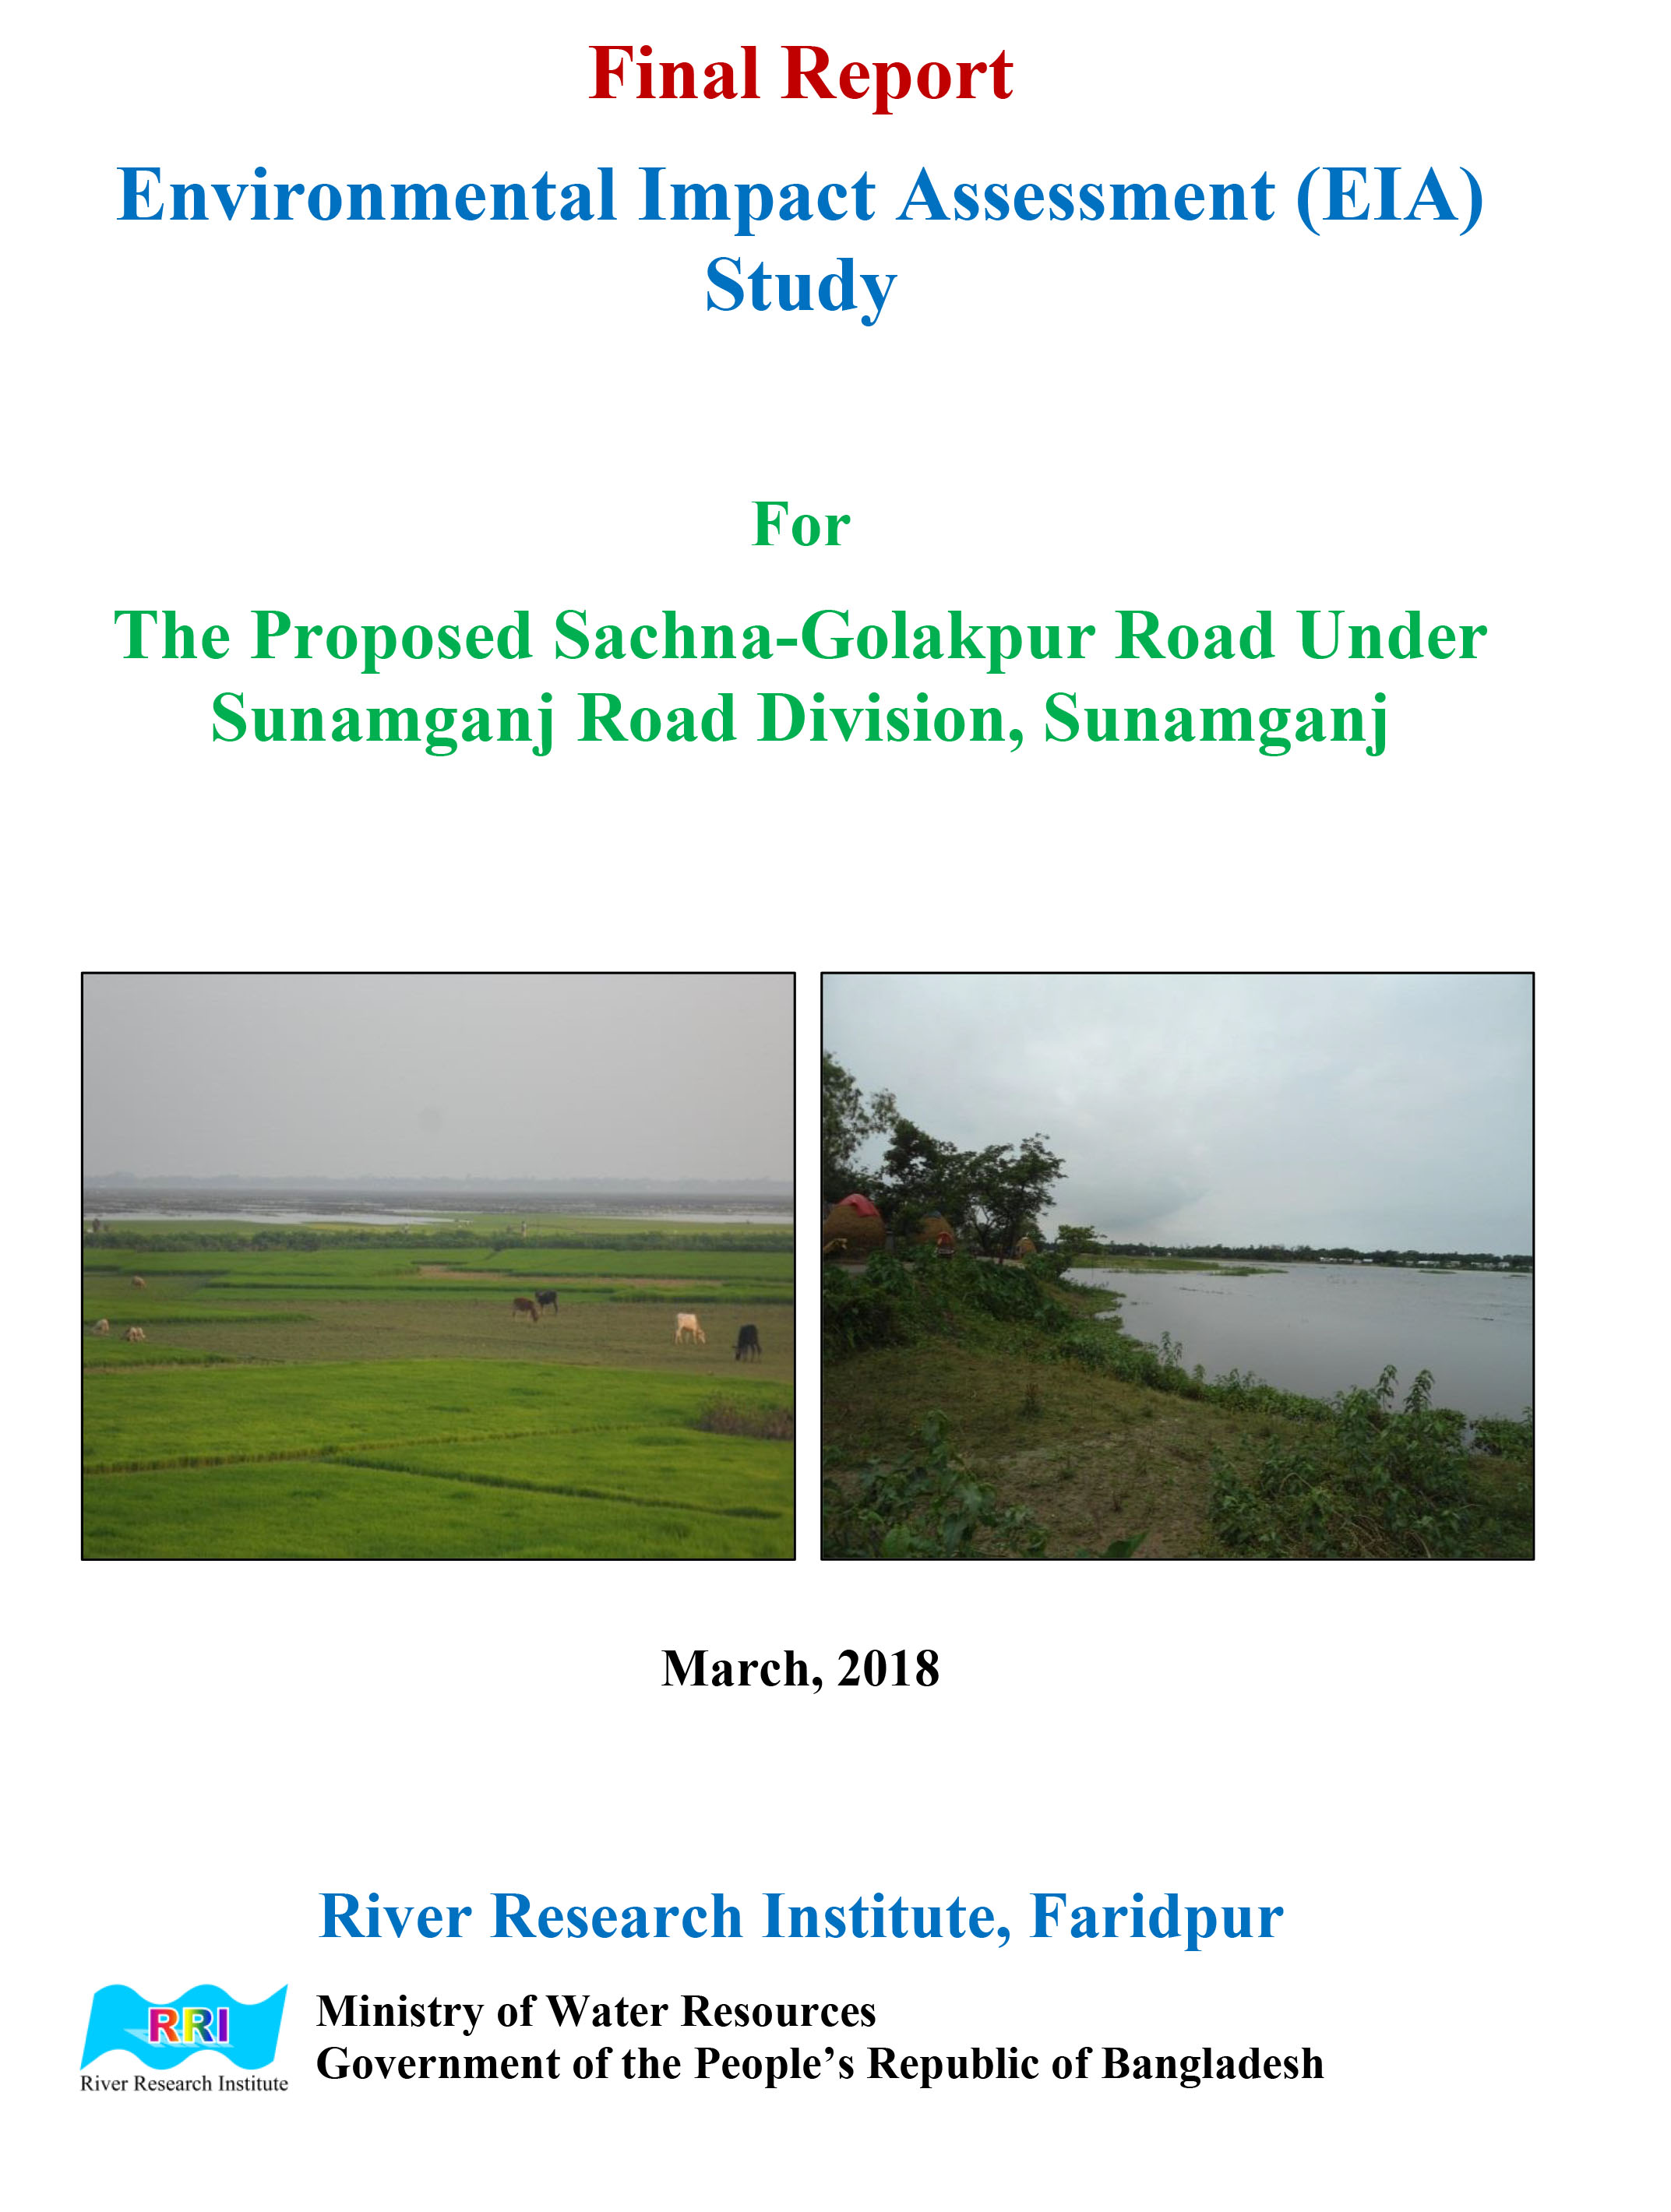 Environmental Impact Assessment (EIA) Study For The Proposed Sachna-Golakpur Road Under Sunamganj Road Division, Sunamganj